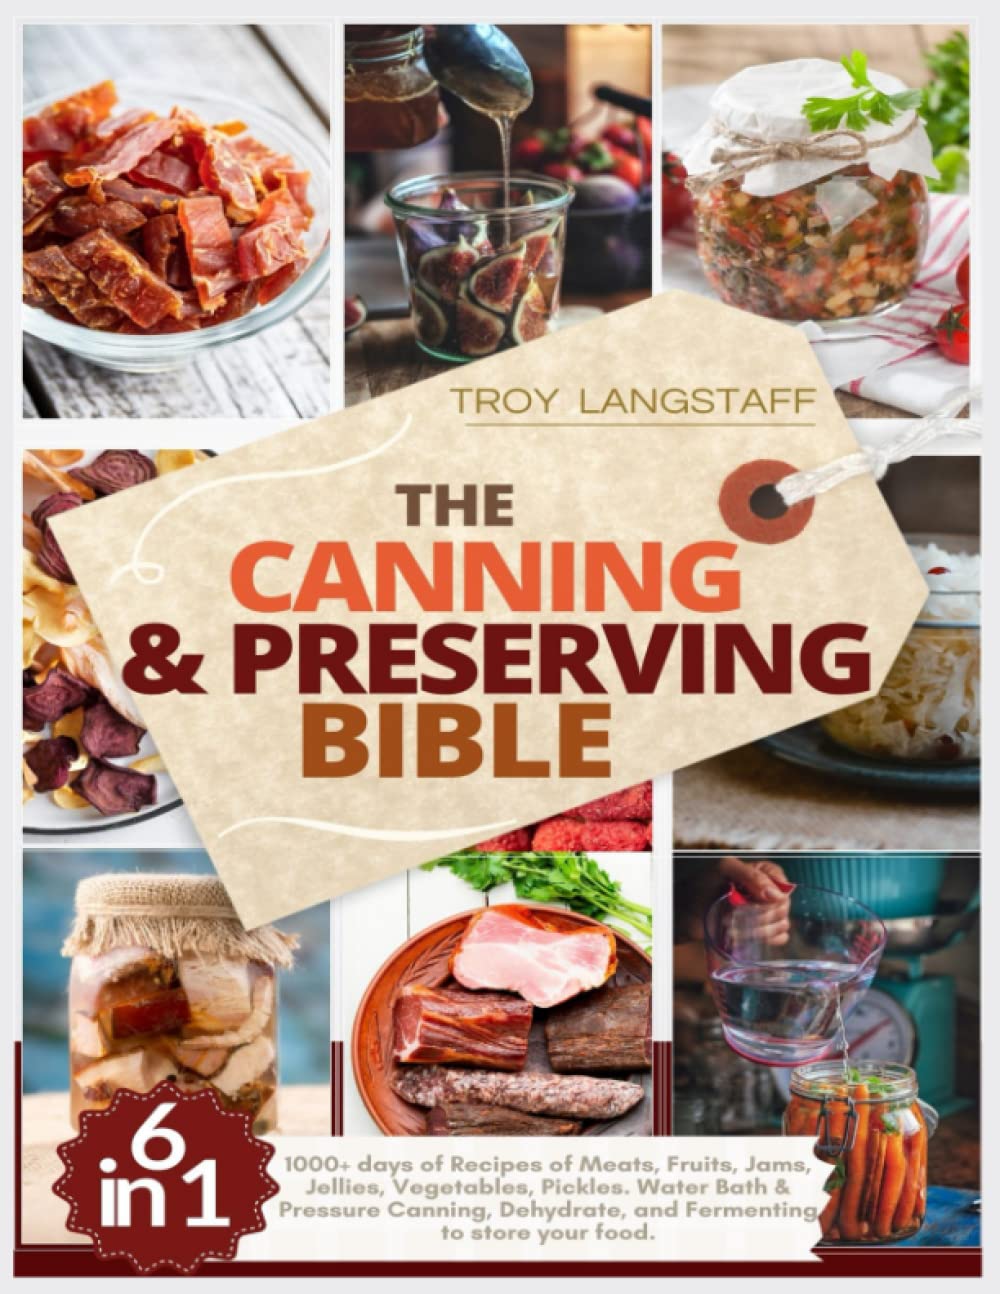 The Canning & Preserving Bible: 6 Books in 1 • 1000+ days of Recipes of Meats, Fruits, Jams, Jellies, Vegetables, Pickles. Water Bath & Pressure Canning, Dehydrate, and Fermenting to Store Your Food